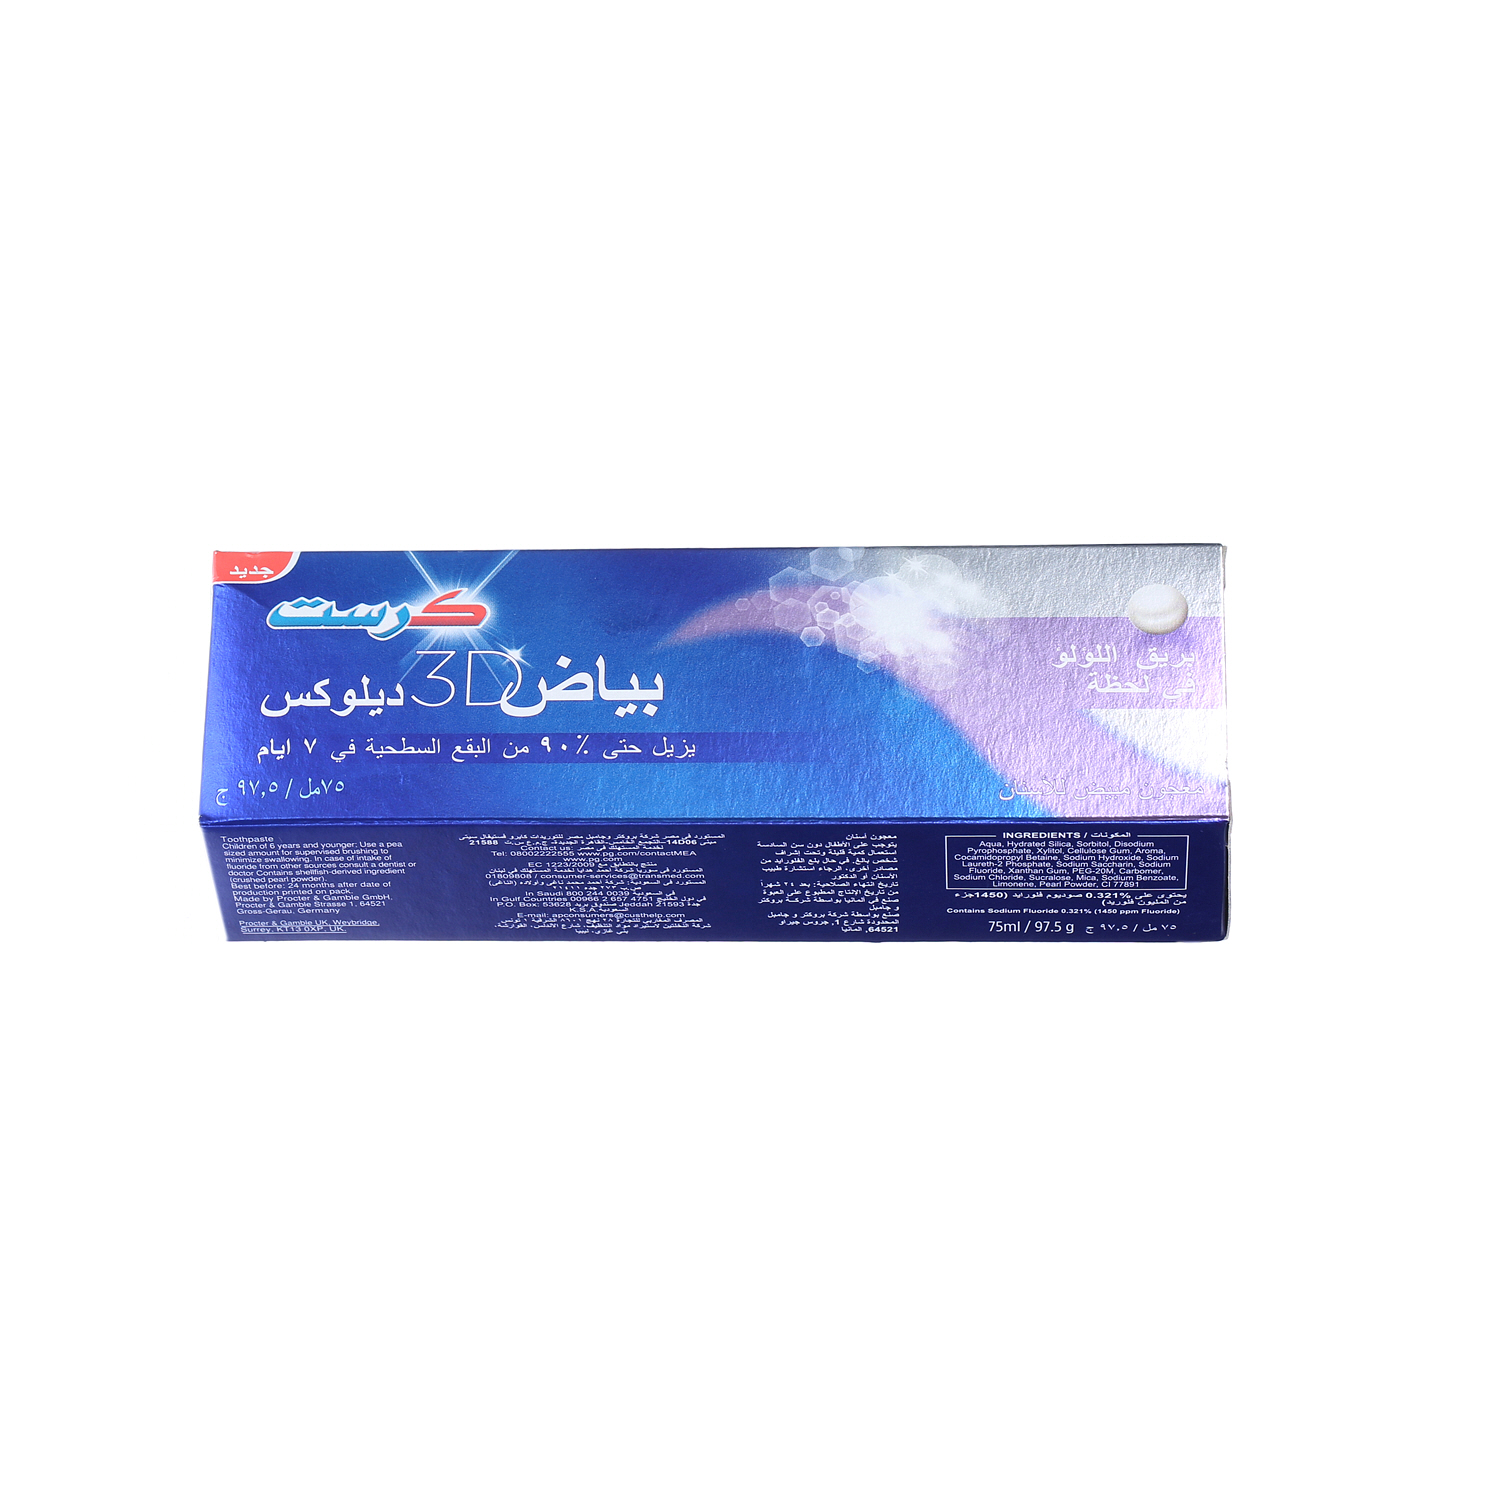 Crest Tooth Paste 3D White Pearl Glow 75 ml